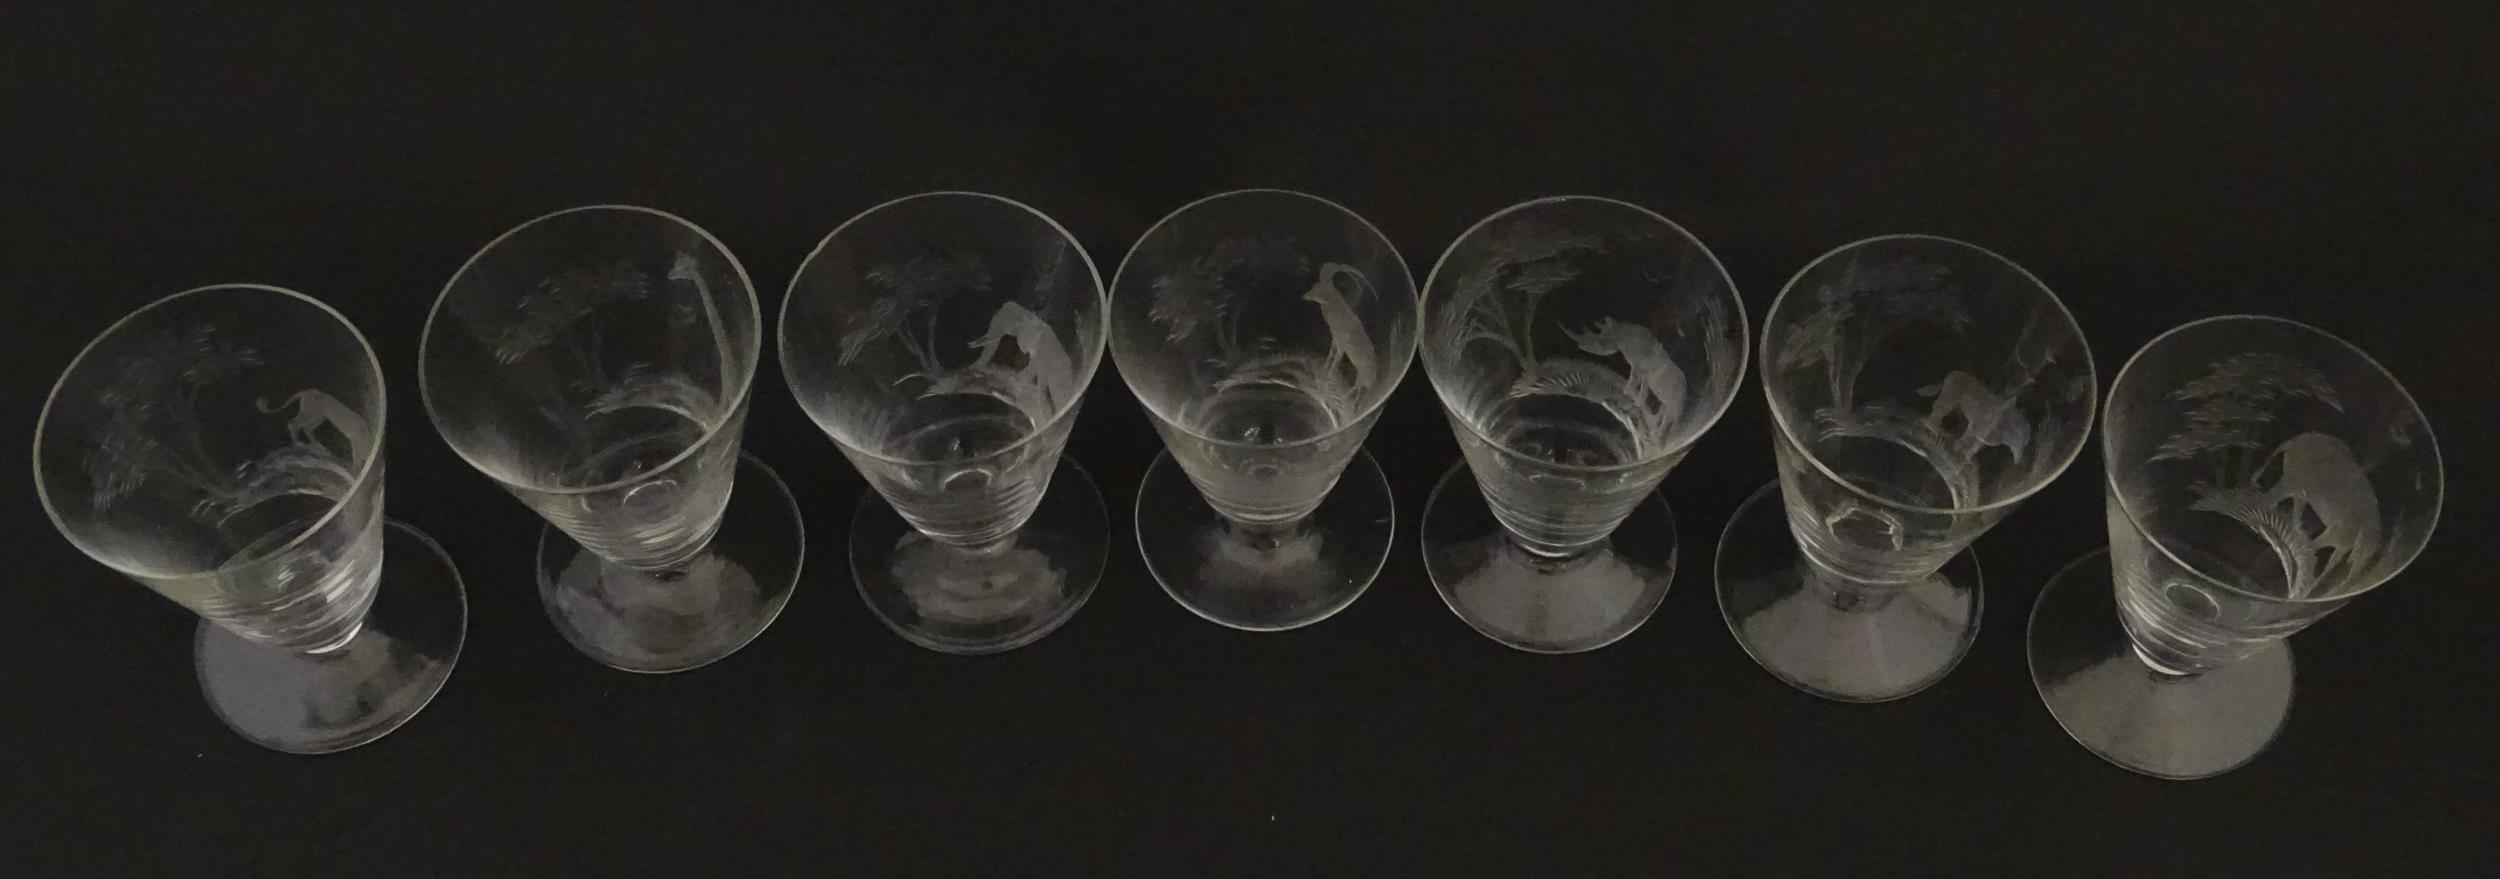 Rowland Ward sherry / liquor glasses with engraved Safari animal detail. Unsigned. Largest approx. - Image 17 of 26